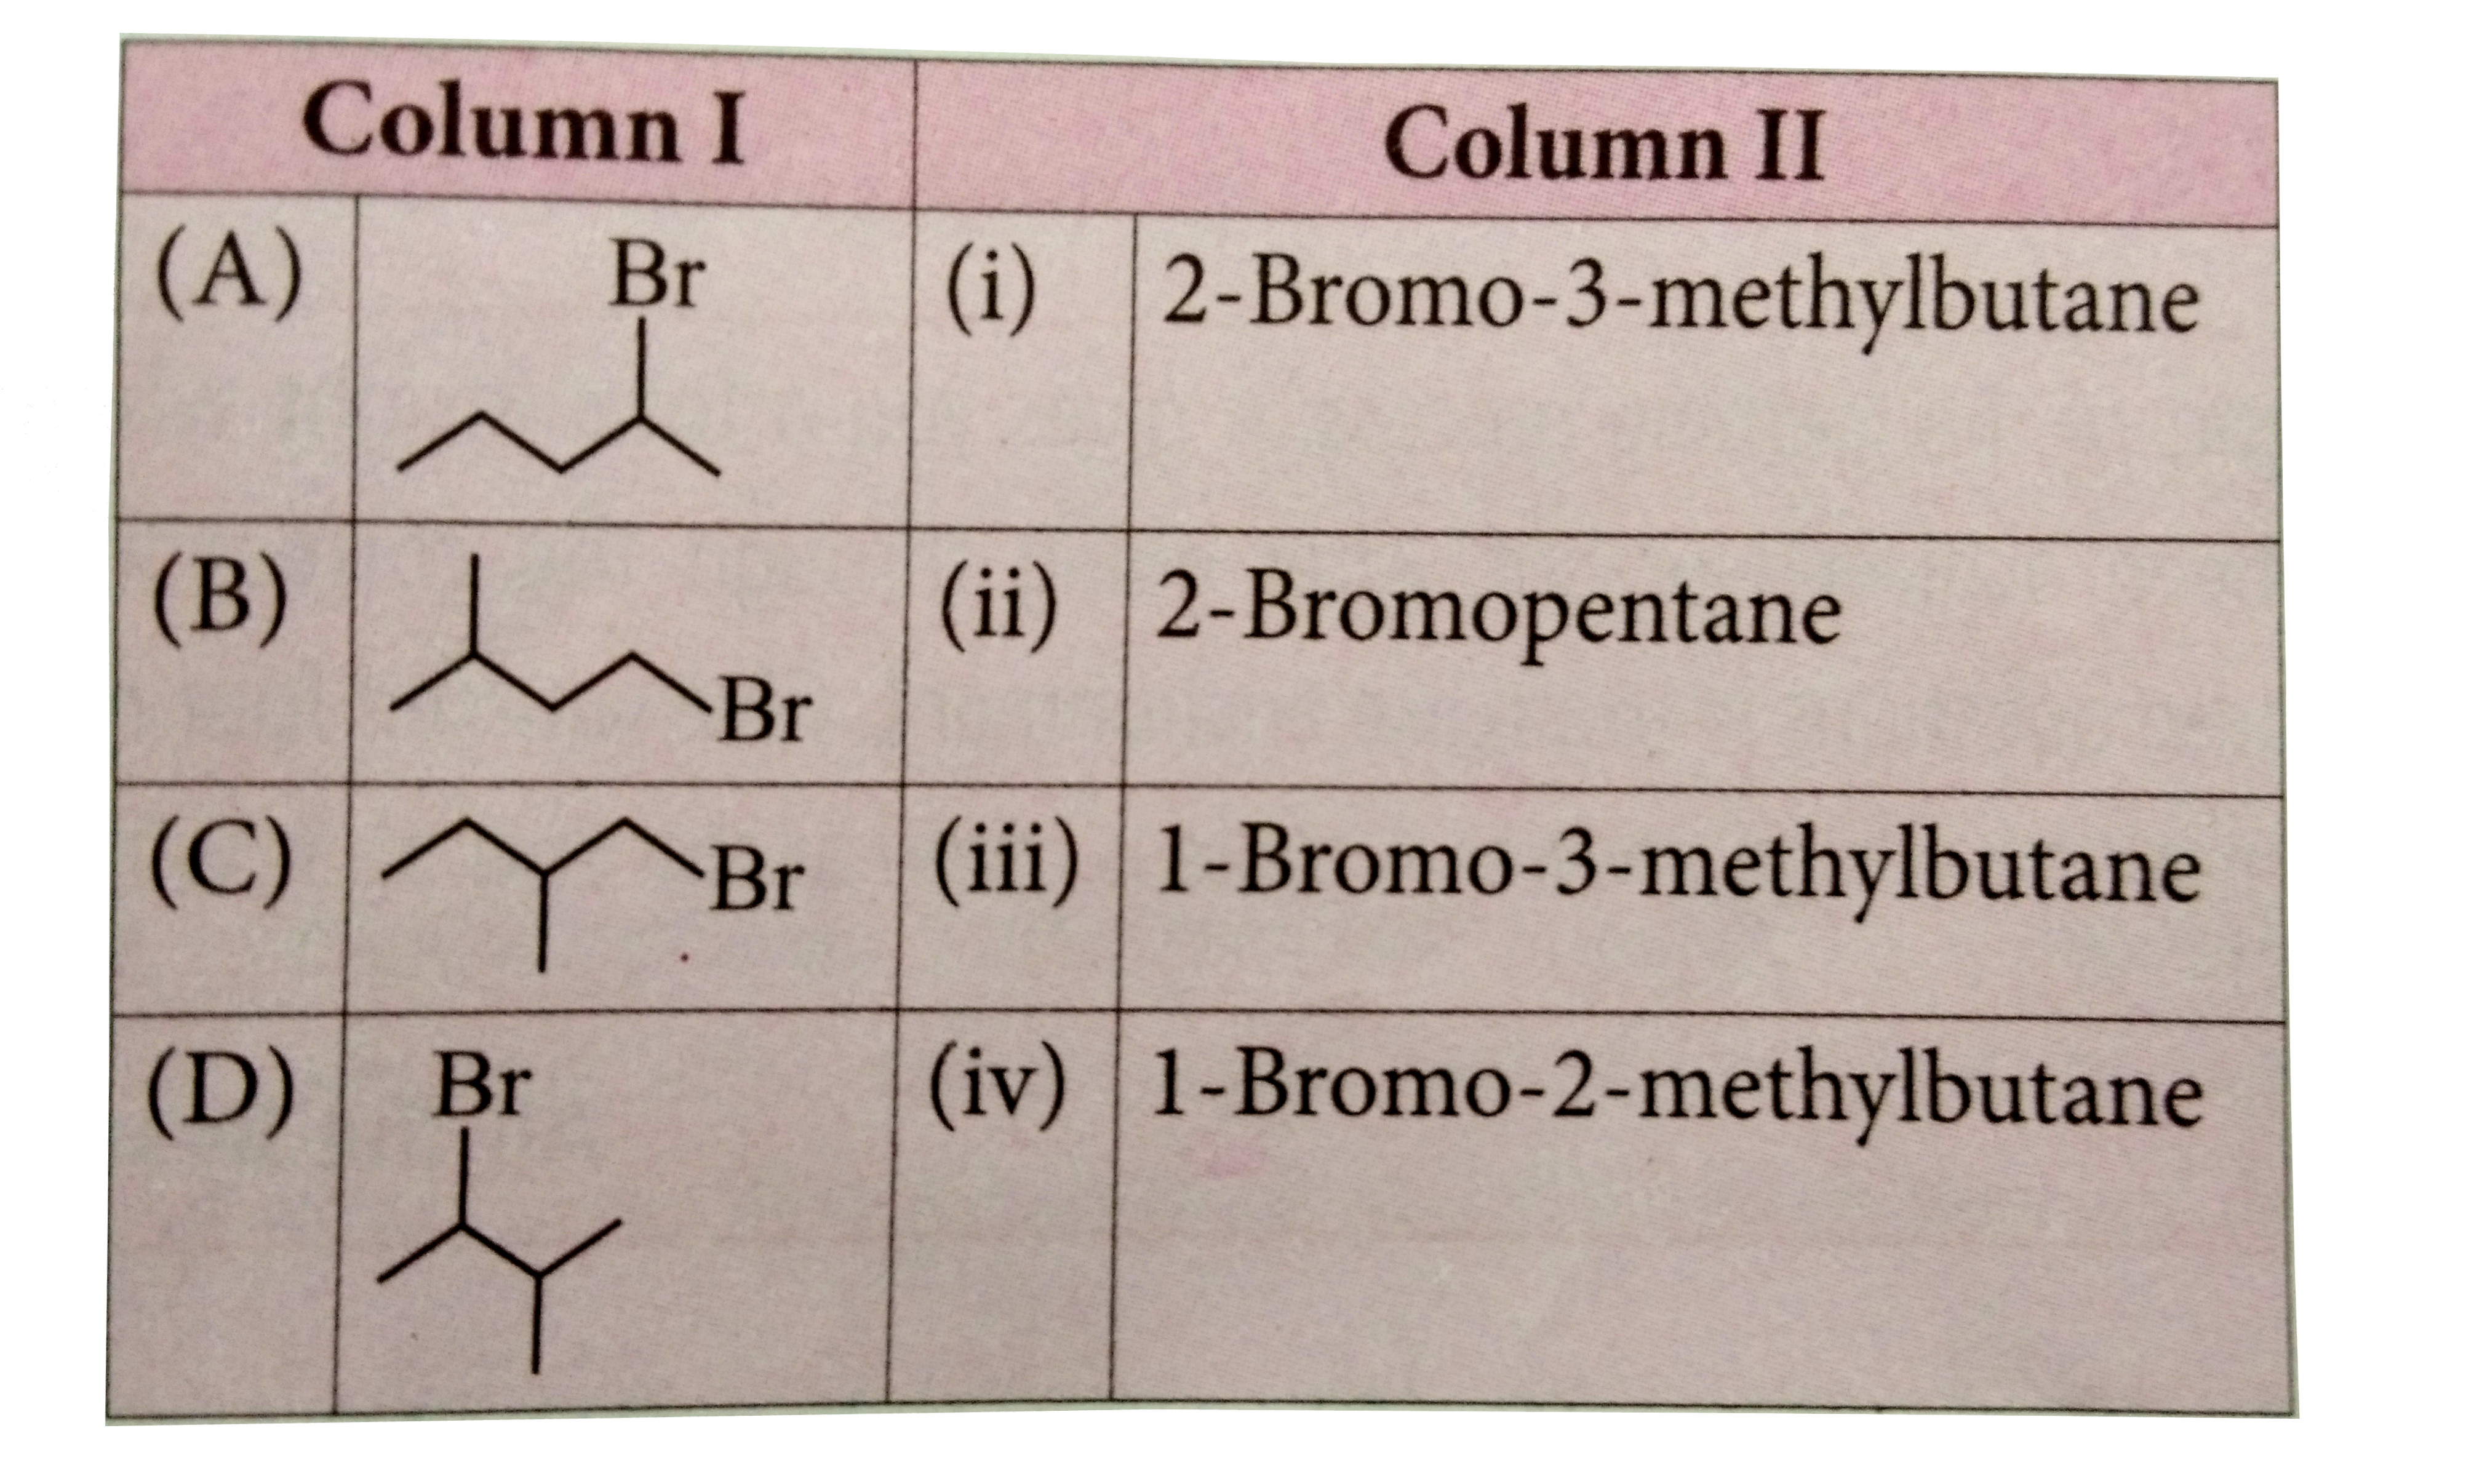 Match the isomers given in column I with their names given in column II and mark the appropriate choice.